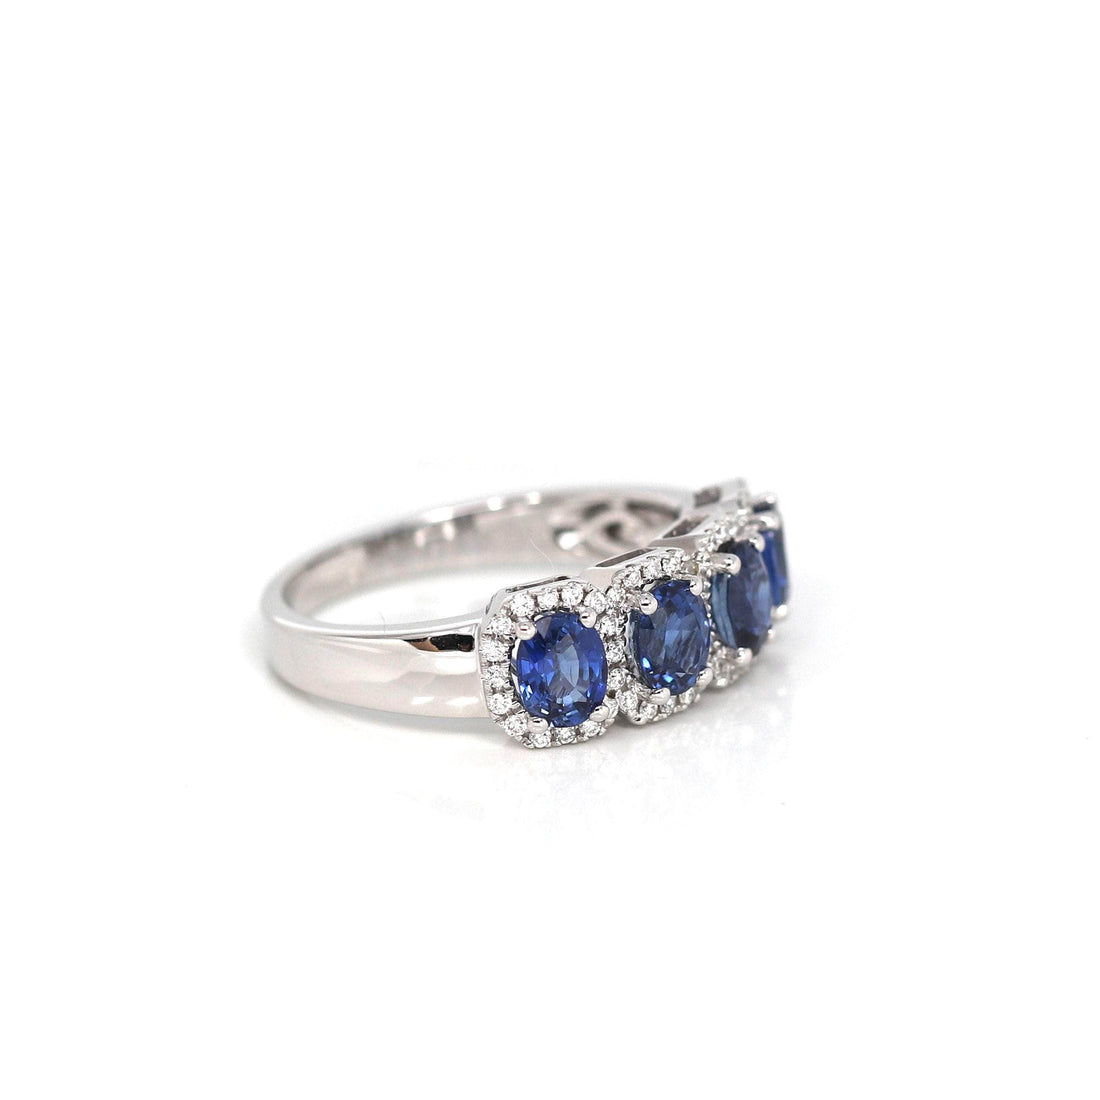 Baikalla Jewelry Gold Sapphire Ring 5 18k White Gold Natural Blue Sapphire Four Stones Set Band Ring with Diamonds